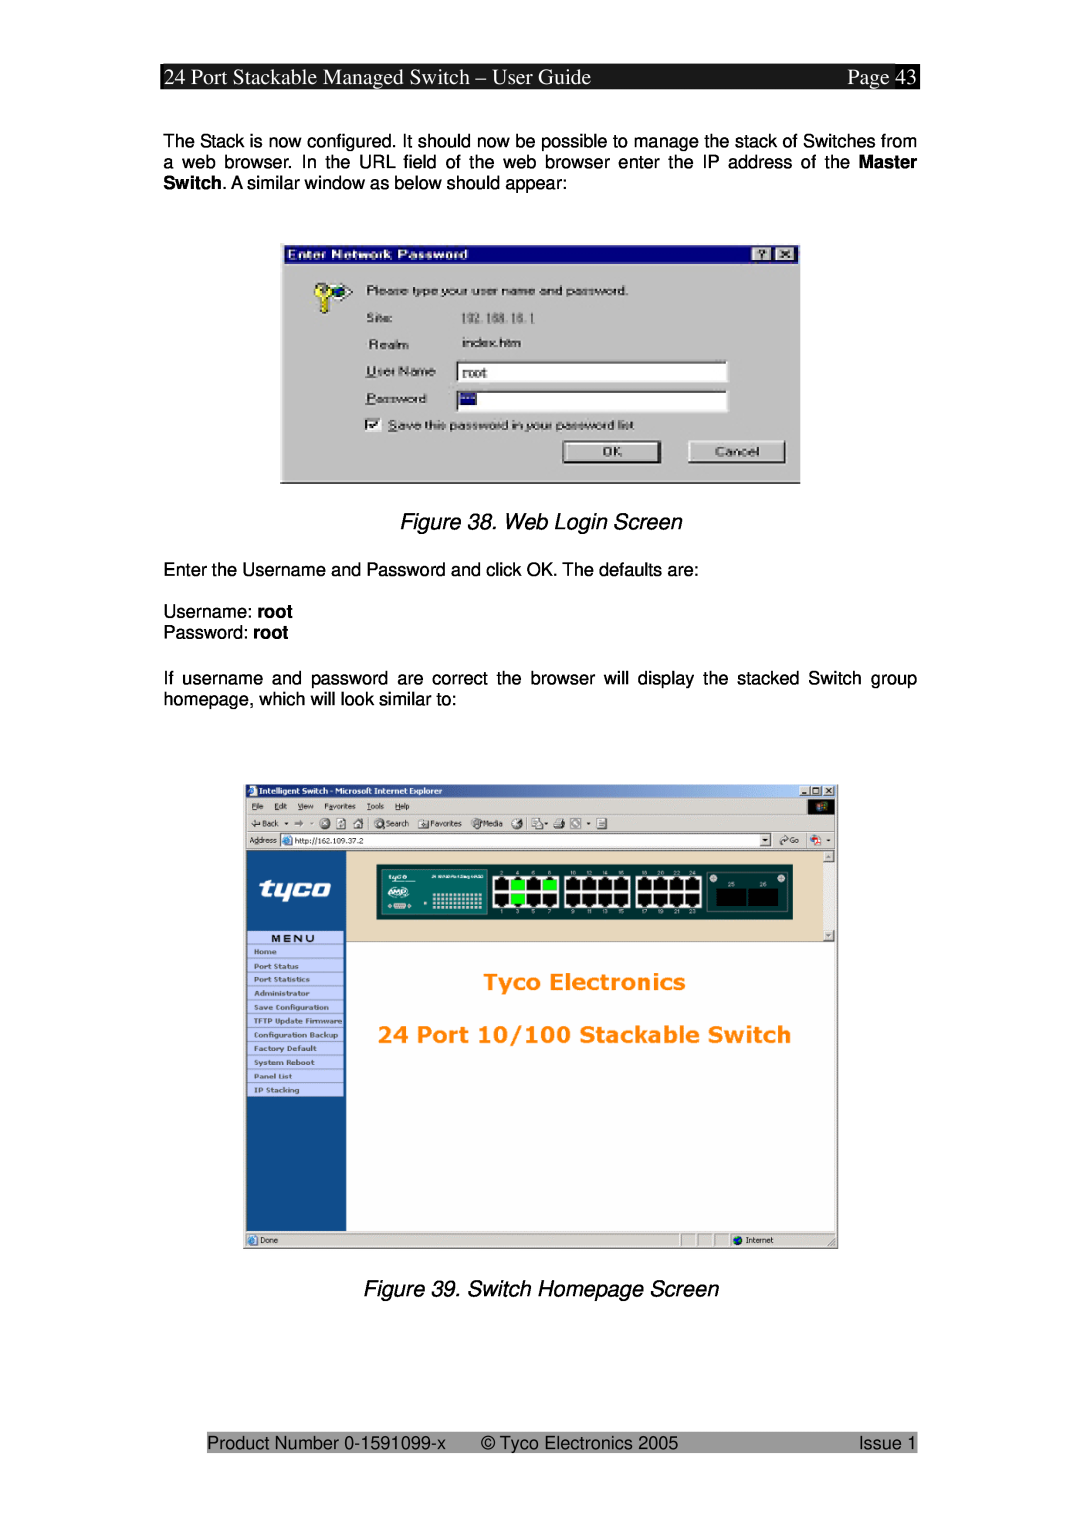 Tyco 0-1591099-x manual Port Stackable Managed Switch - User Guide, Page, Web Login Screen, Switch Homepage Screen 